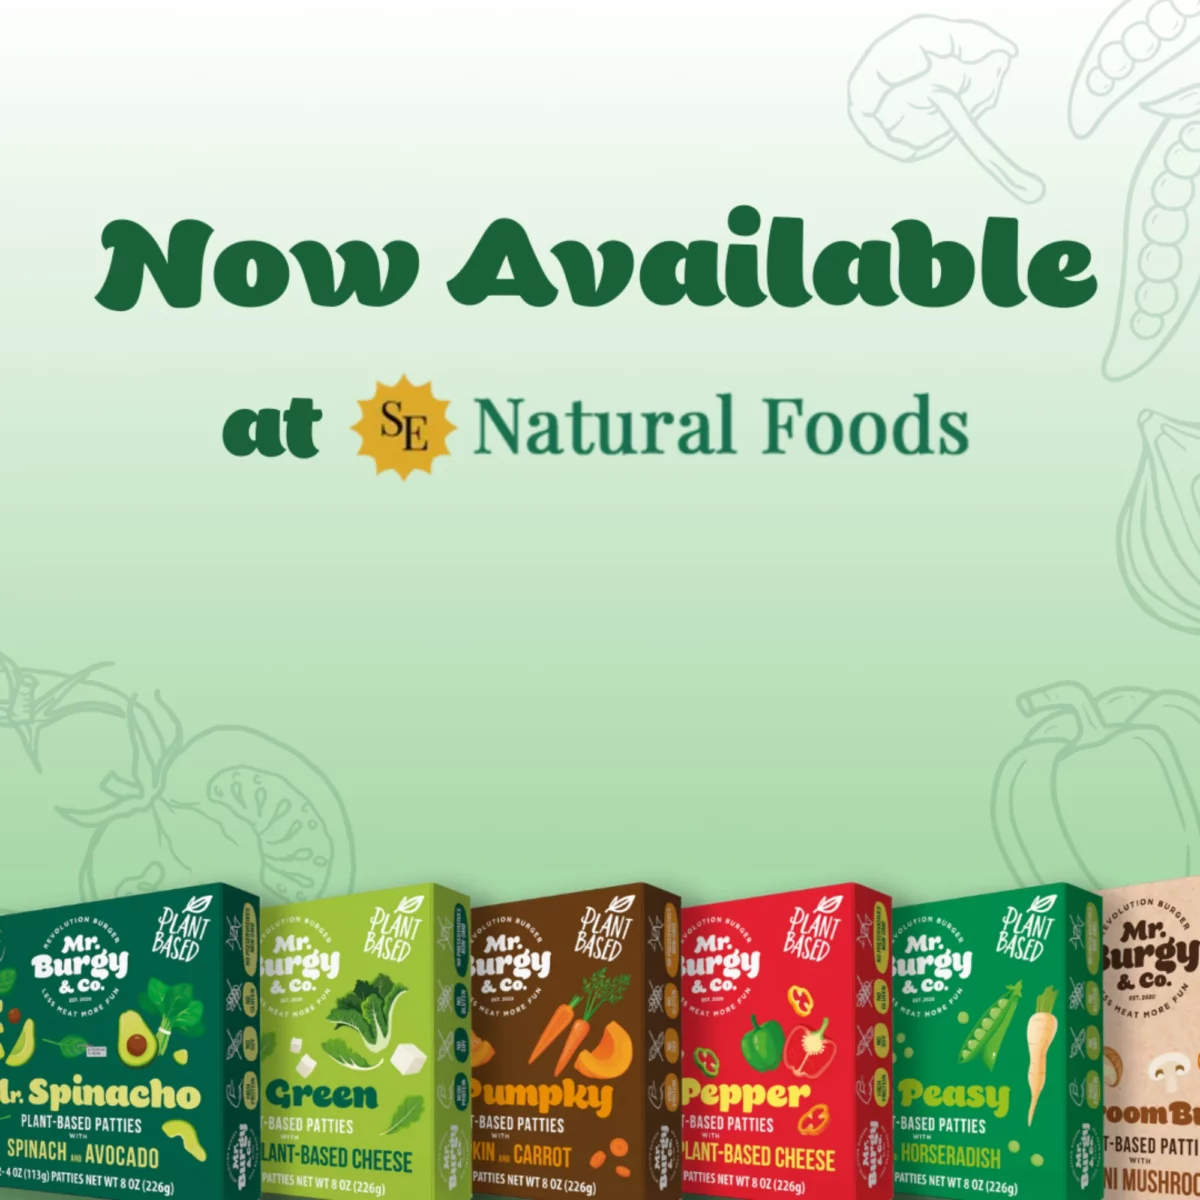 Social media post promoting that Mr Burgy and Co is now available at SE Natural Foods